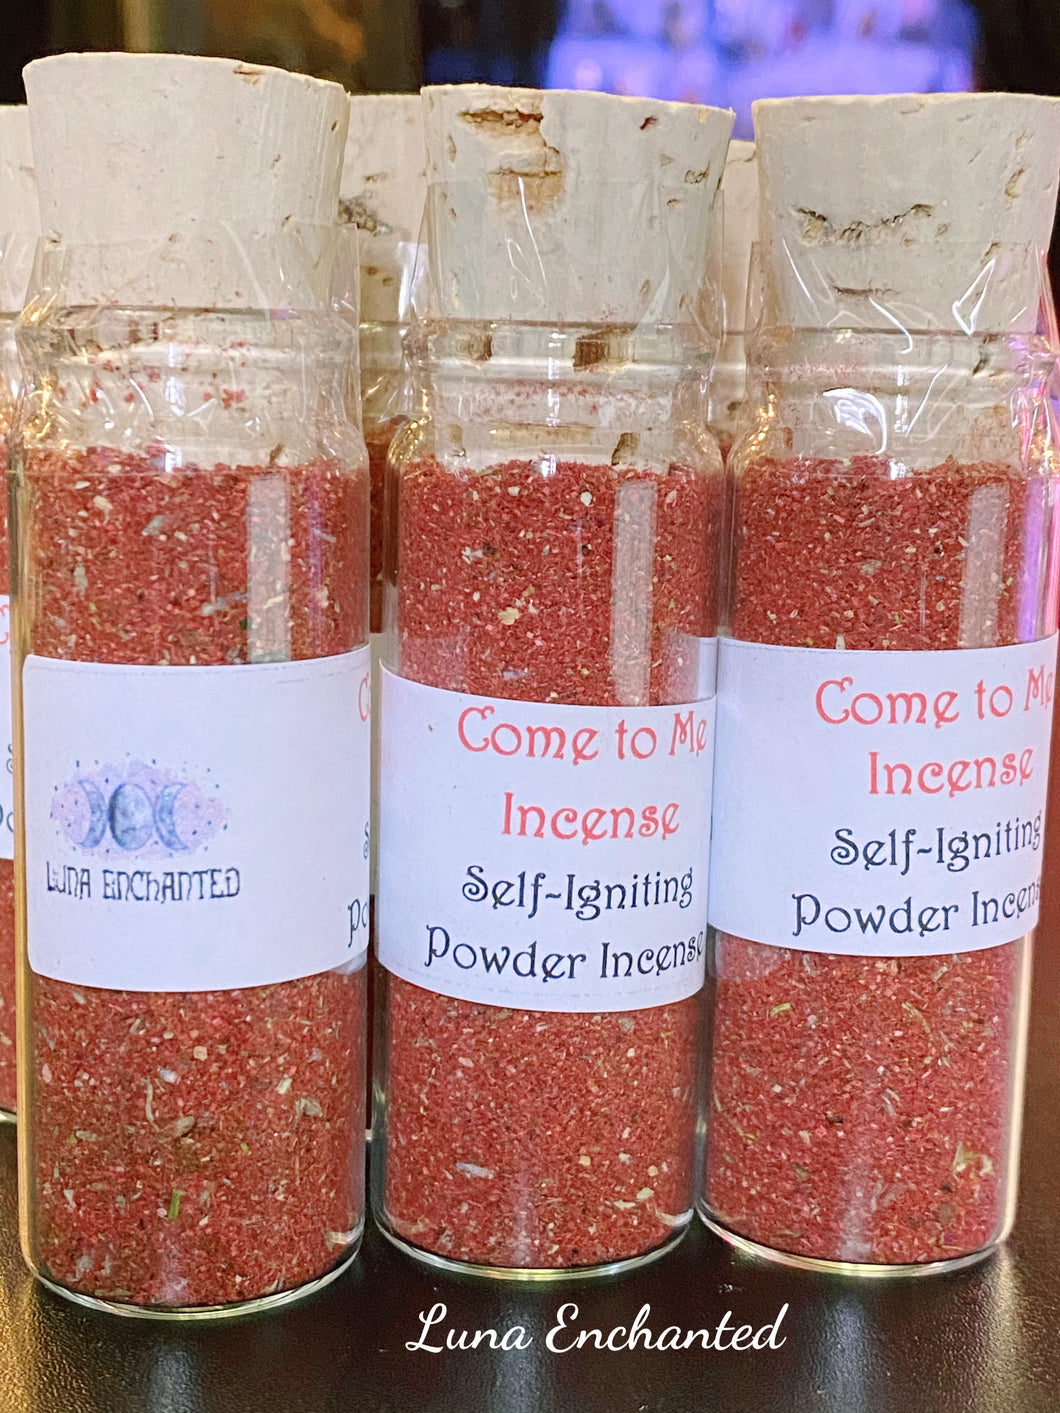 Come To Me Incense (Self- Igniting Powdered Incense)